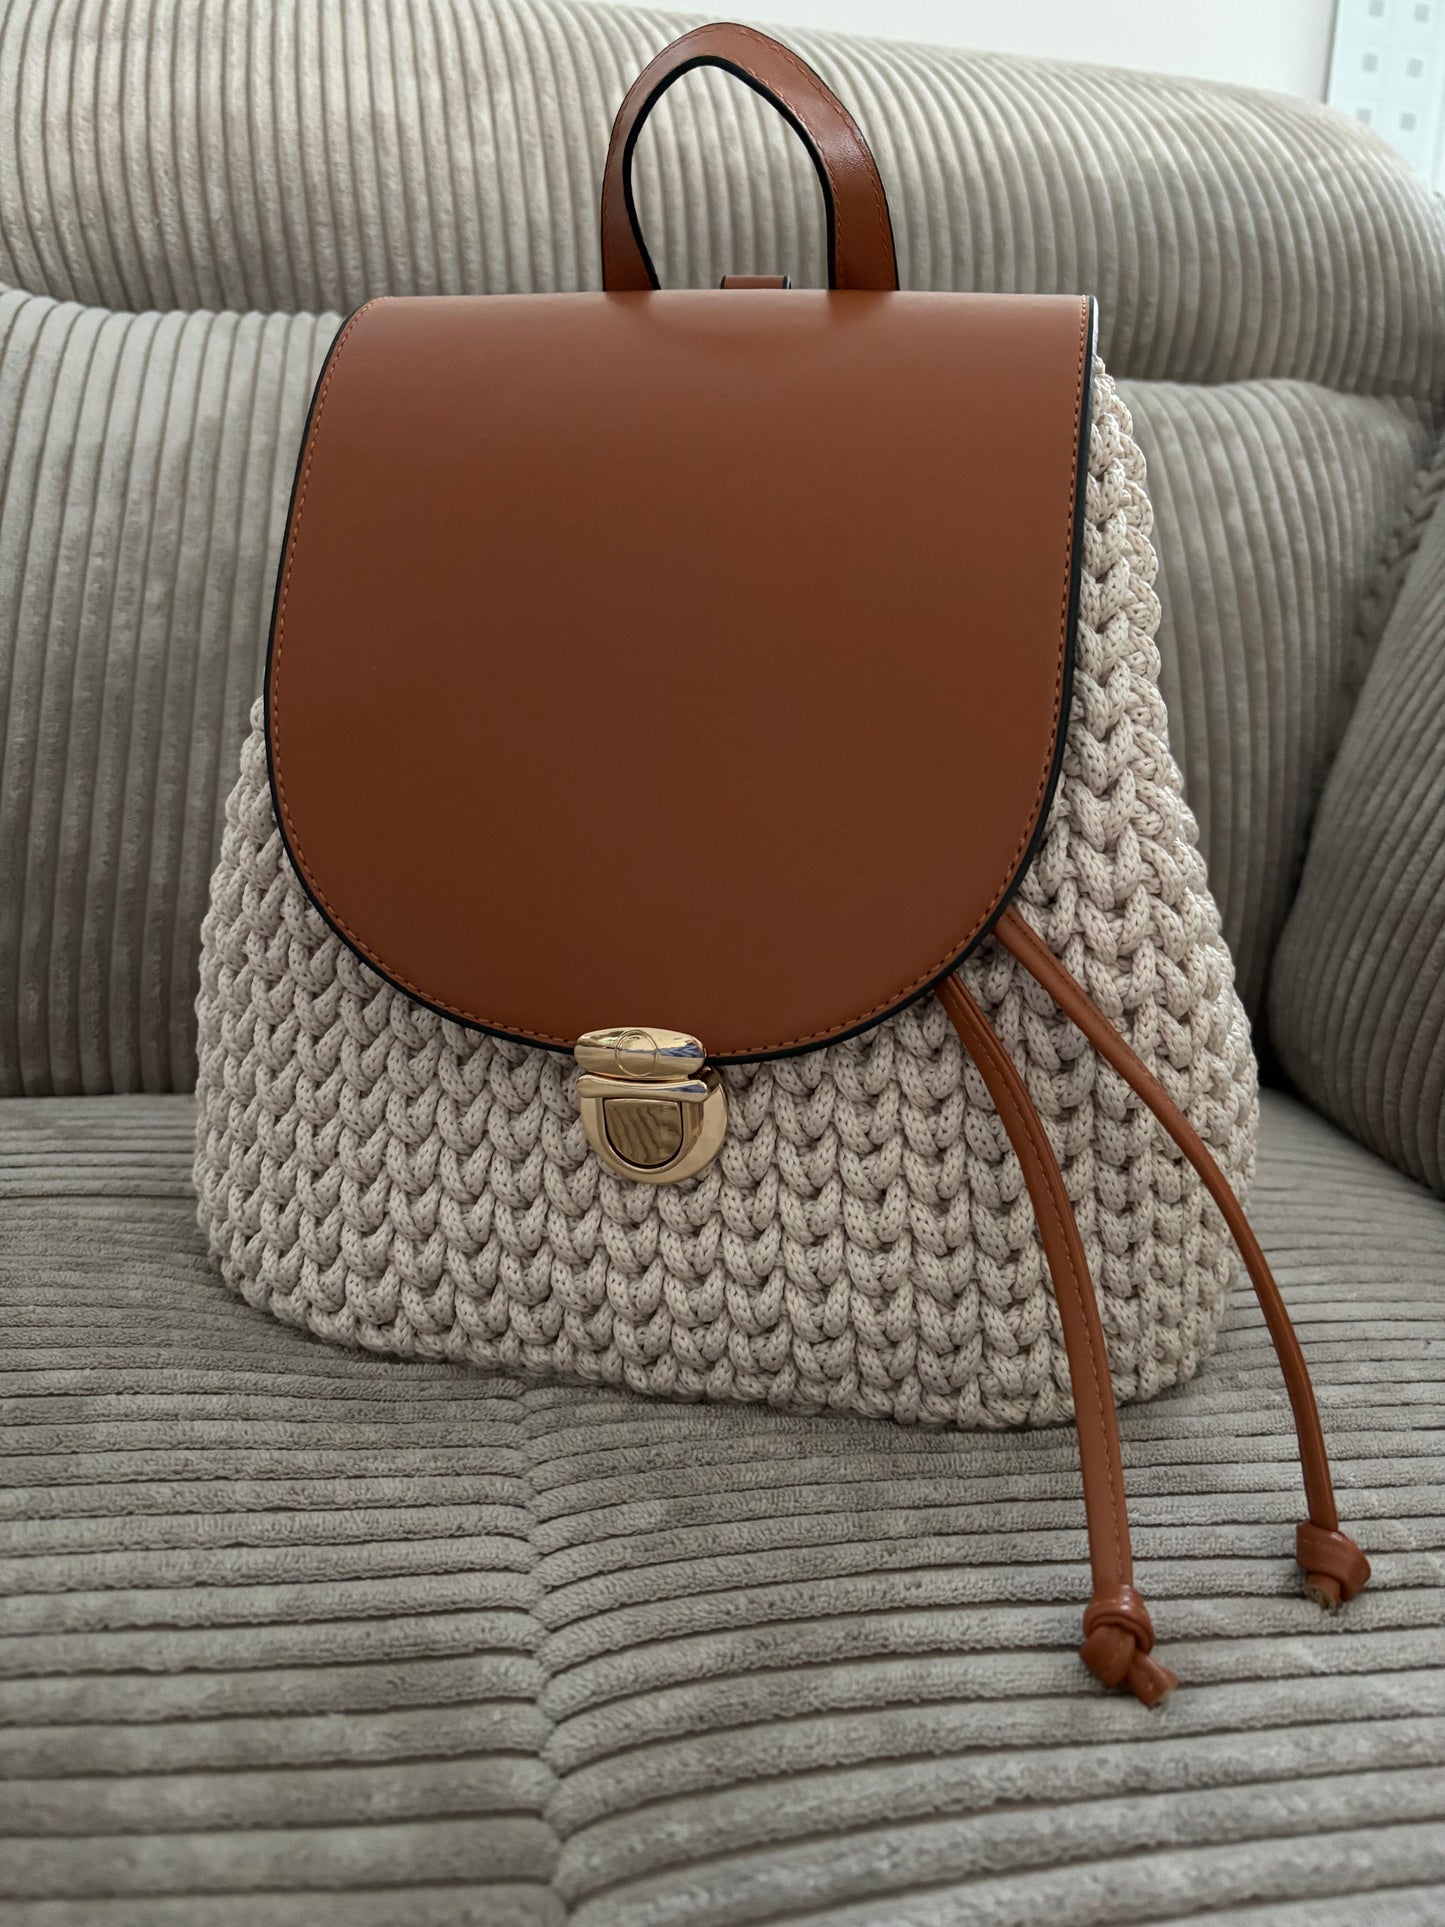 Handmade small backpack with vegan leather